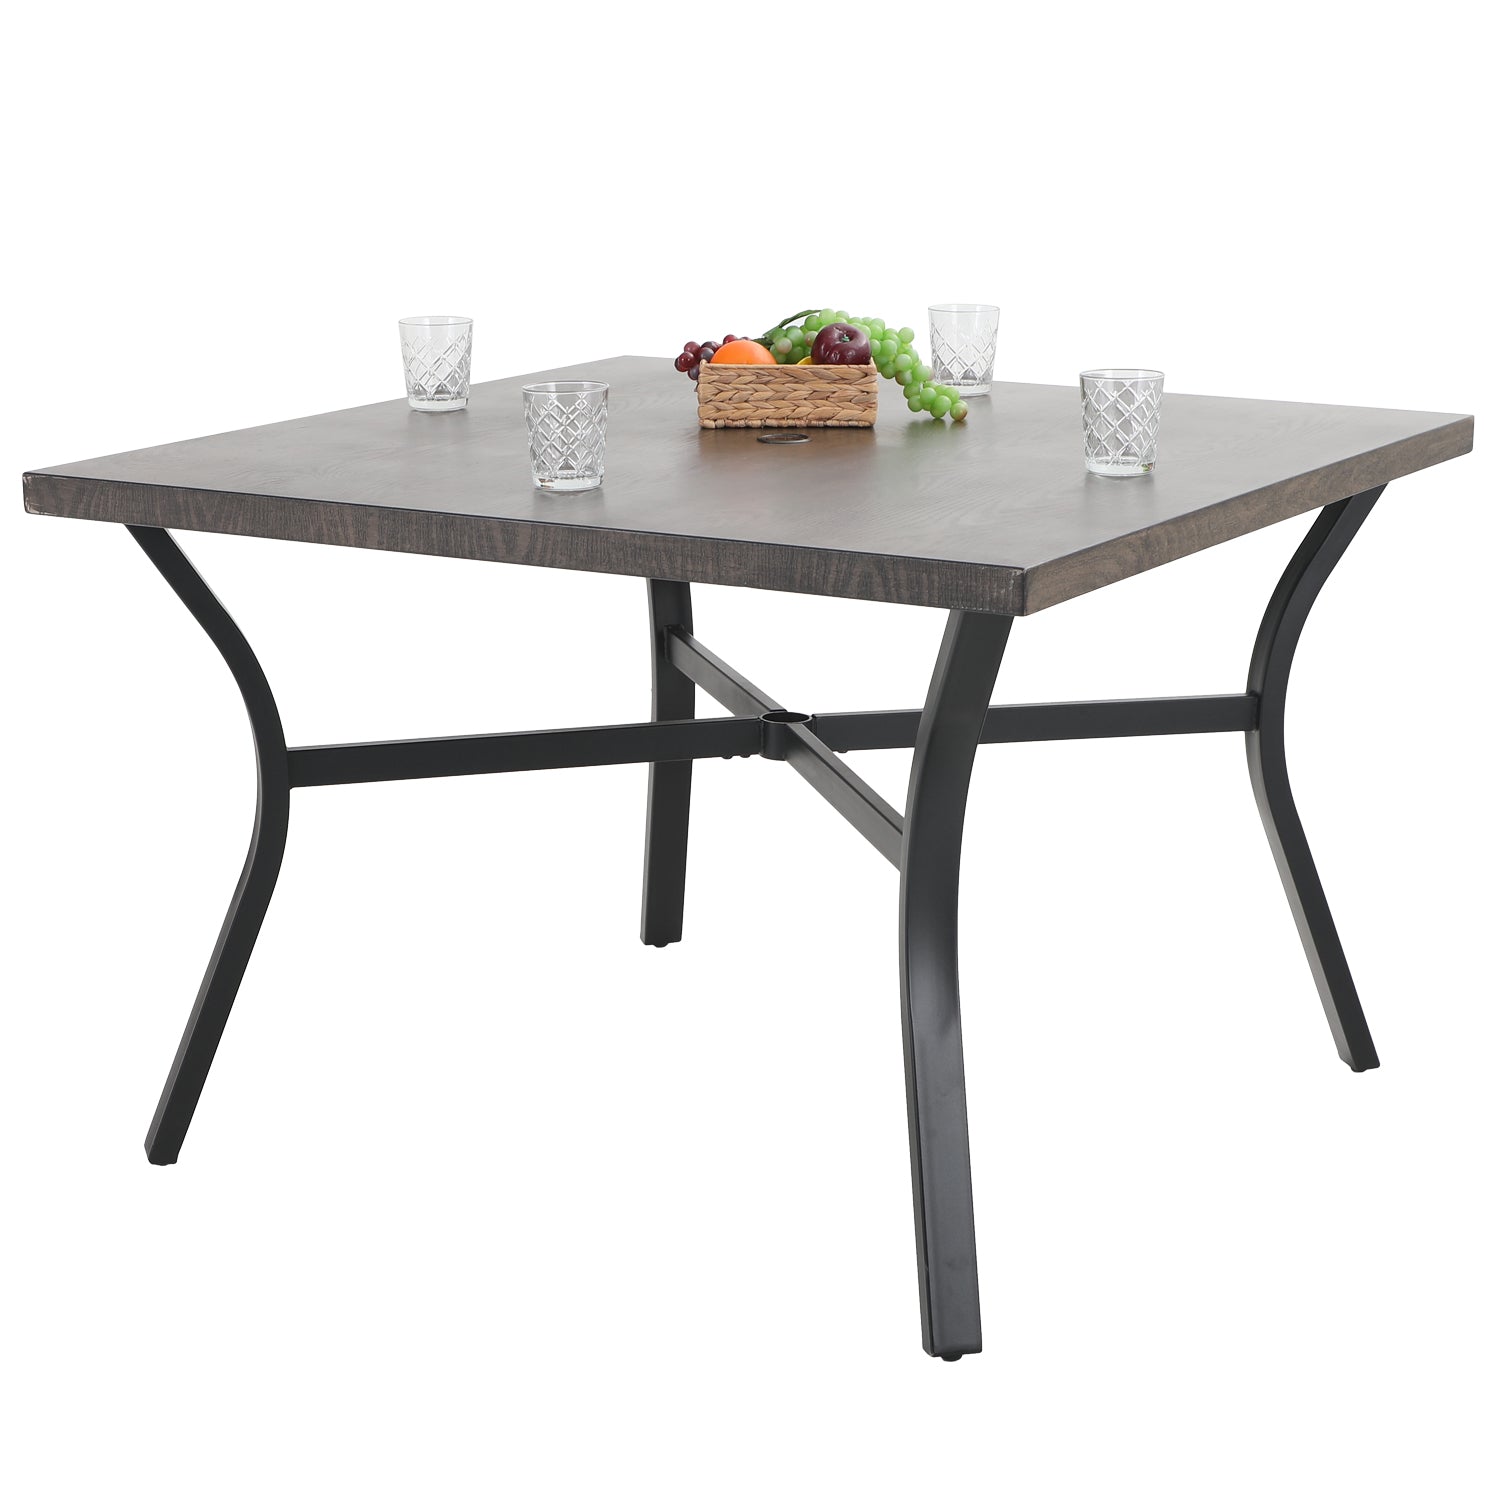 PHI VILLA 40" x 40" Wood-look Pattern Metal Square Outdoor Dining Table